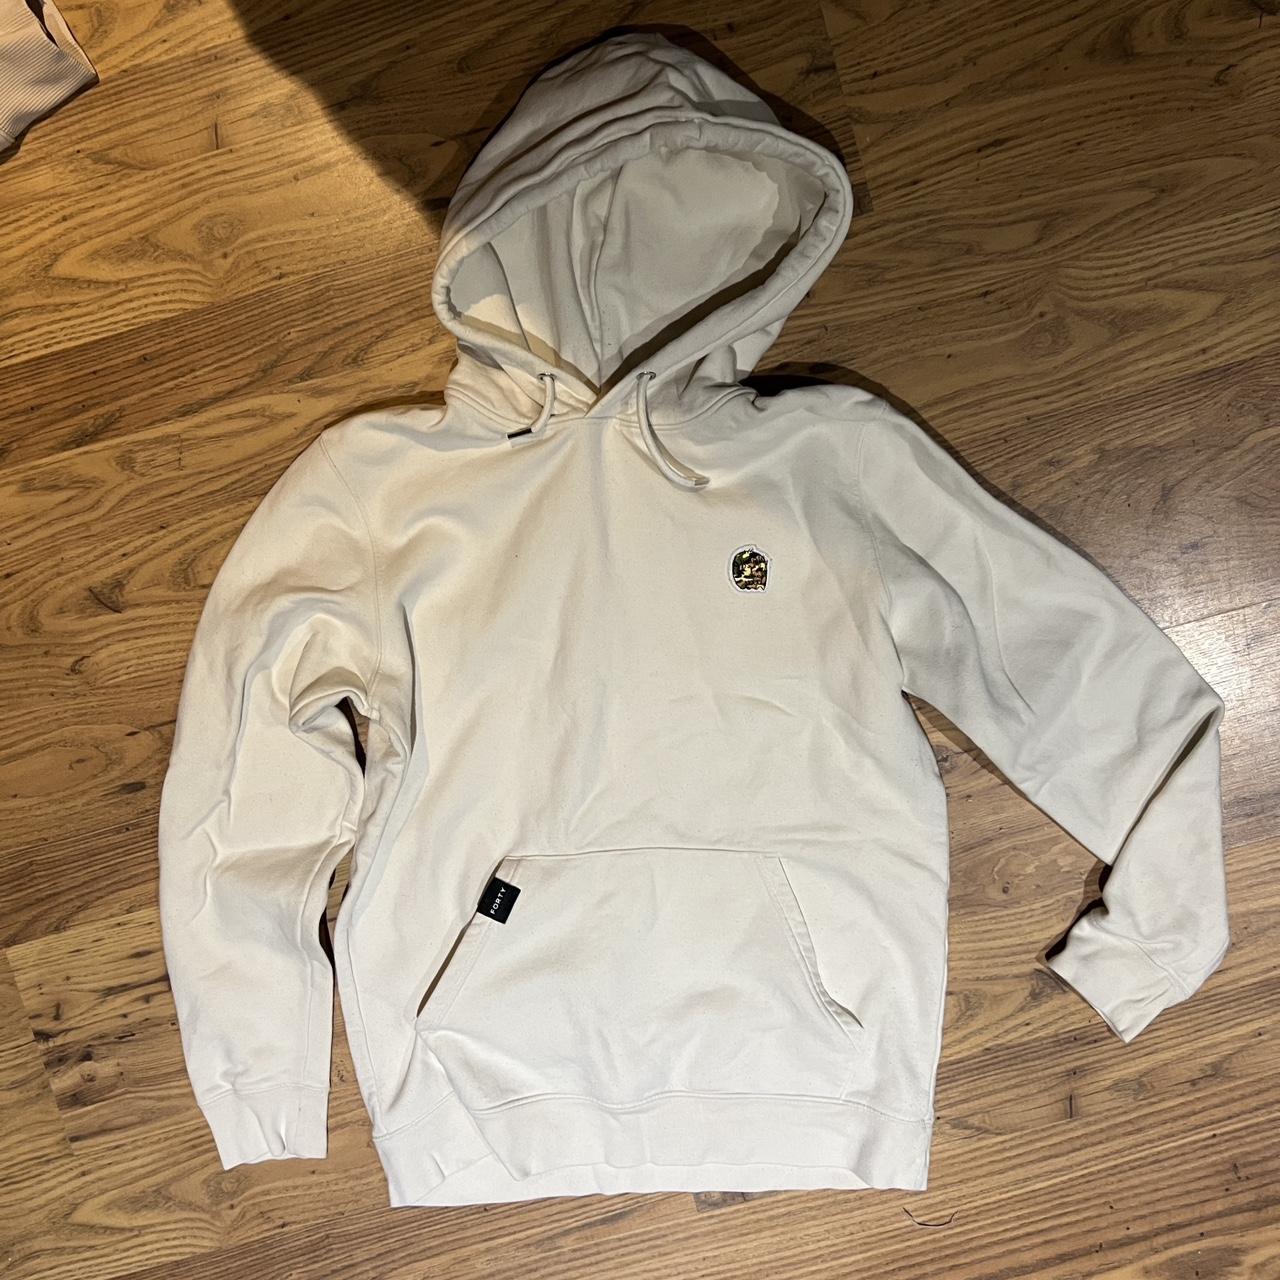 Forty hoodie never worn, mint condition - Depop